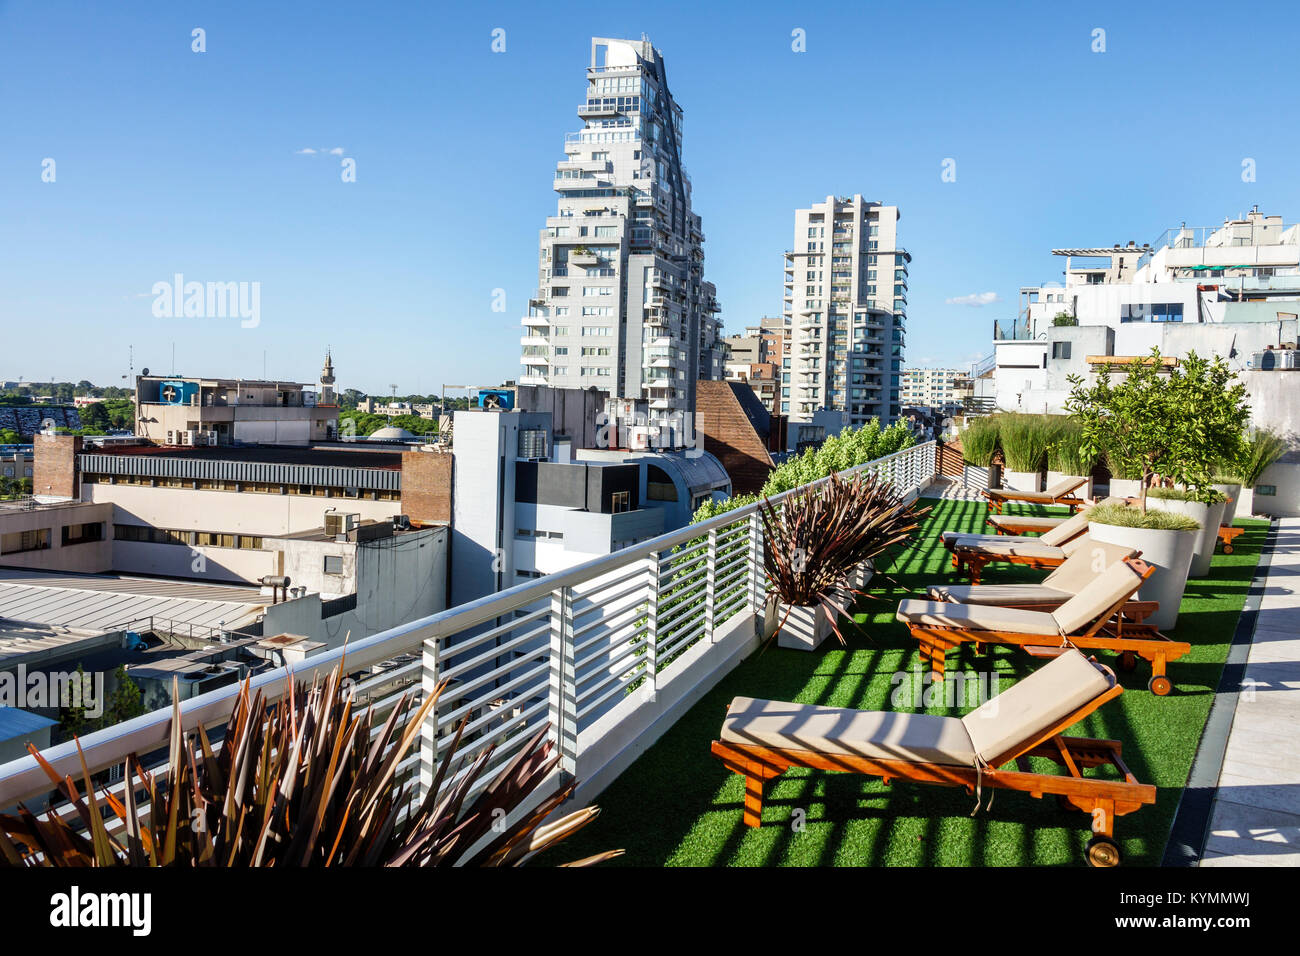 Buenos Aires Argentina,Palermo,Dazzler Polo,hotel,rooftop terrace,city skyline,view,apartment building,architecture,lounge chair,railing,planter,Hispa Stock Photo